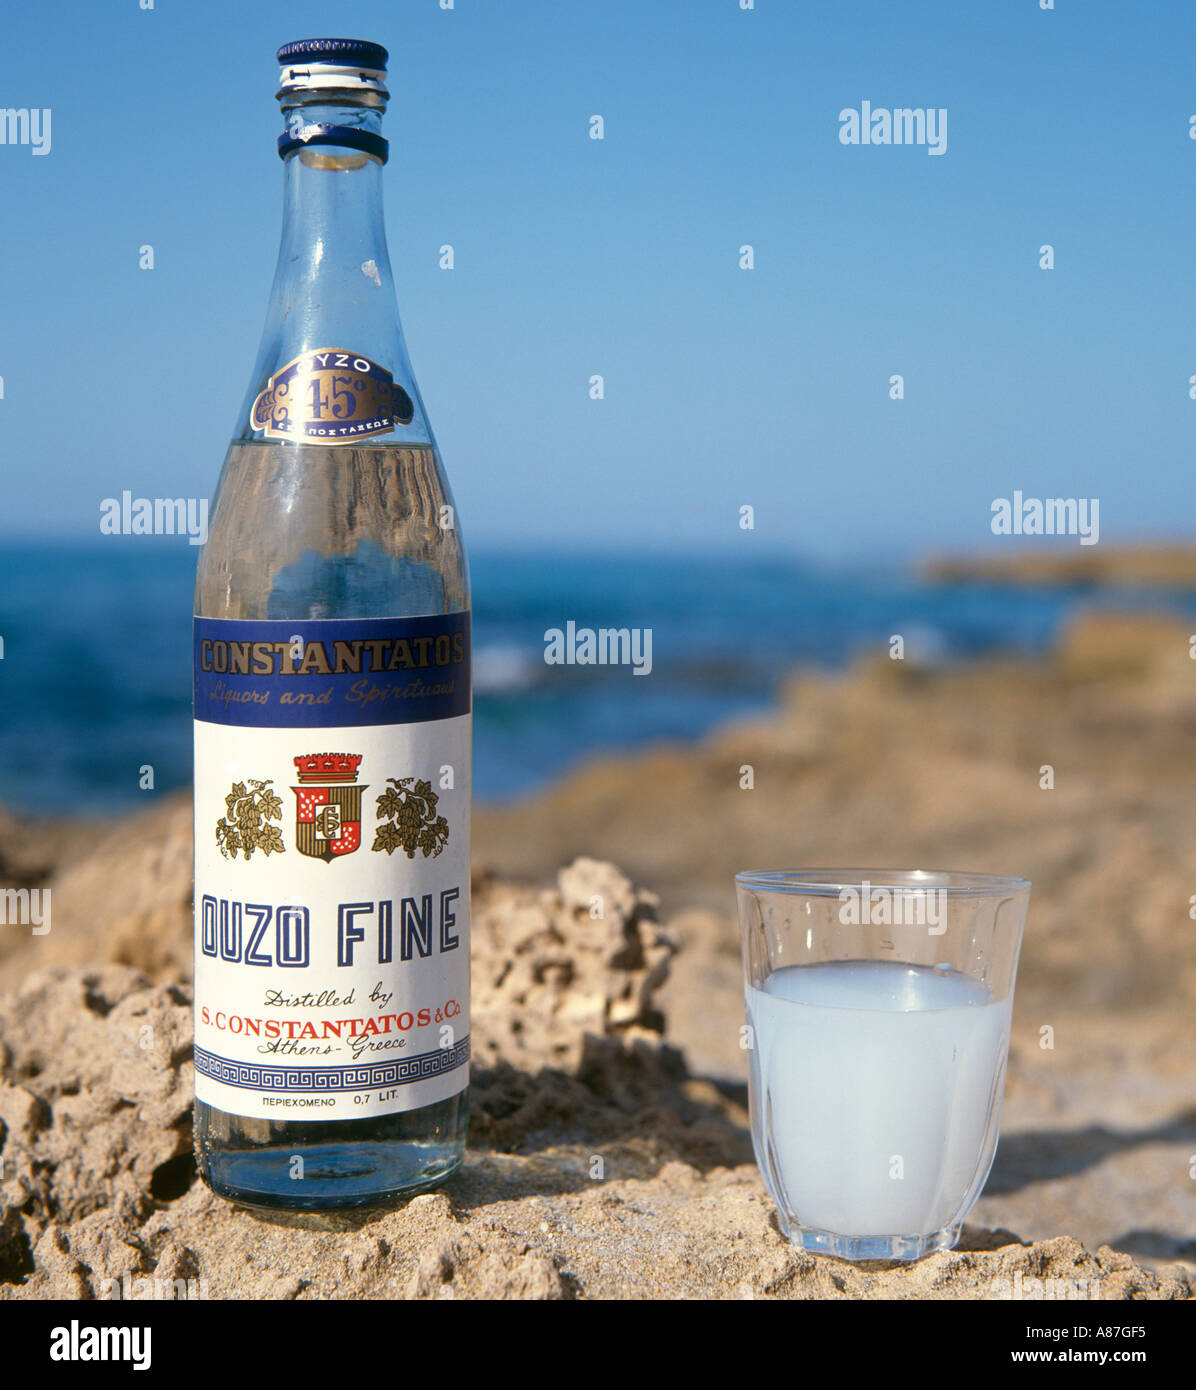 Bottle and glass of Ouzo on the beach, Greece Stock Photo